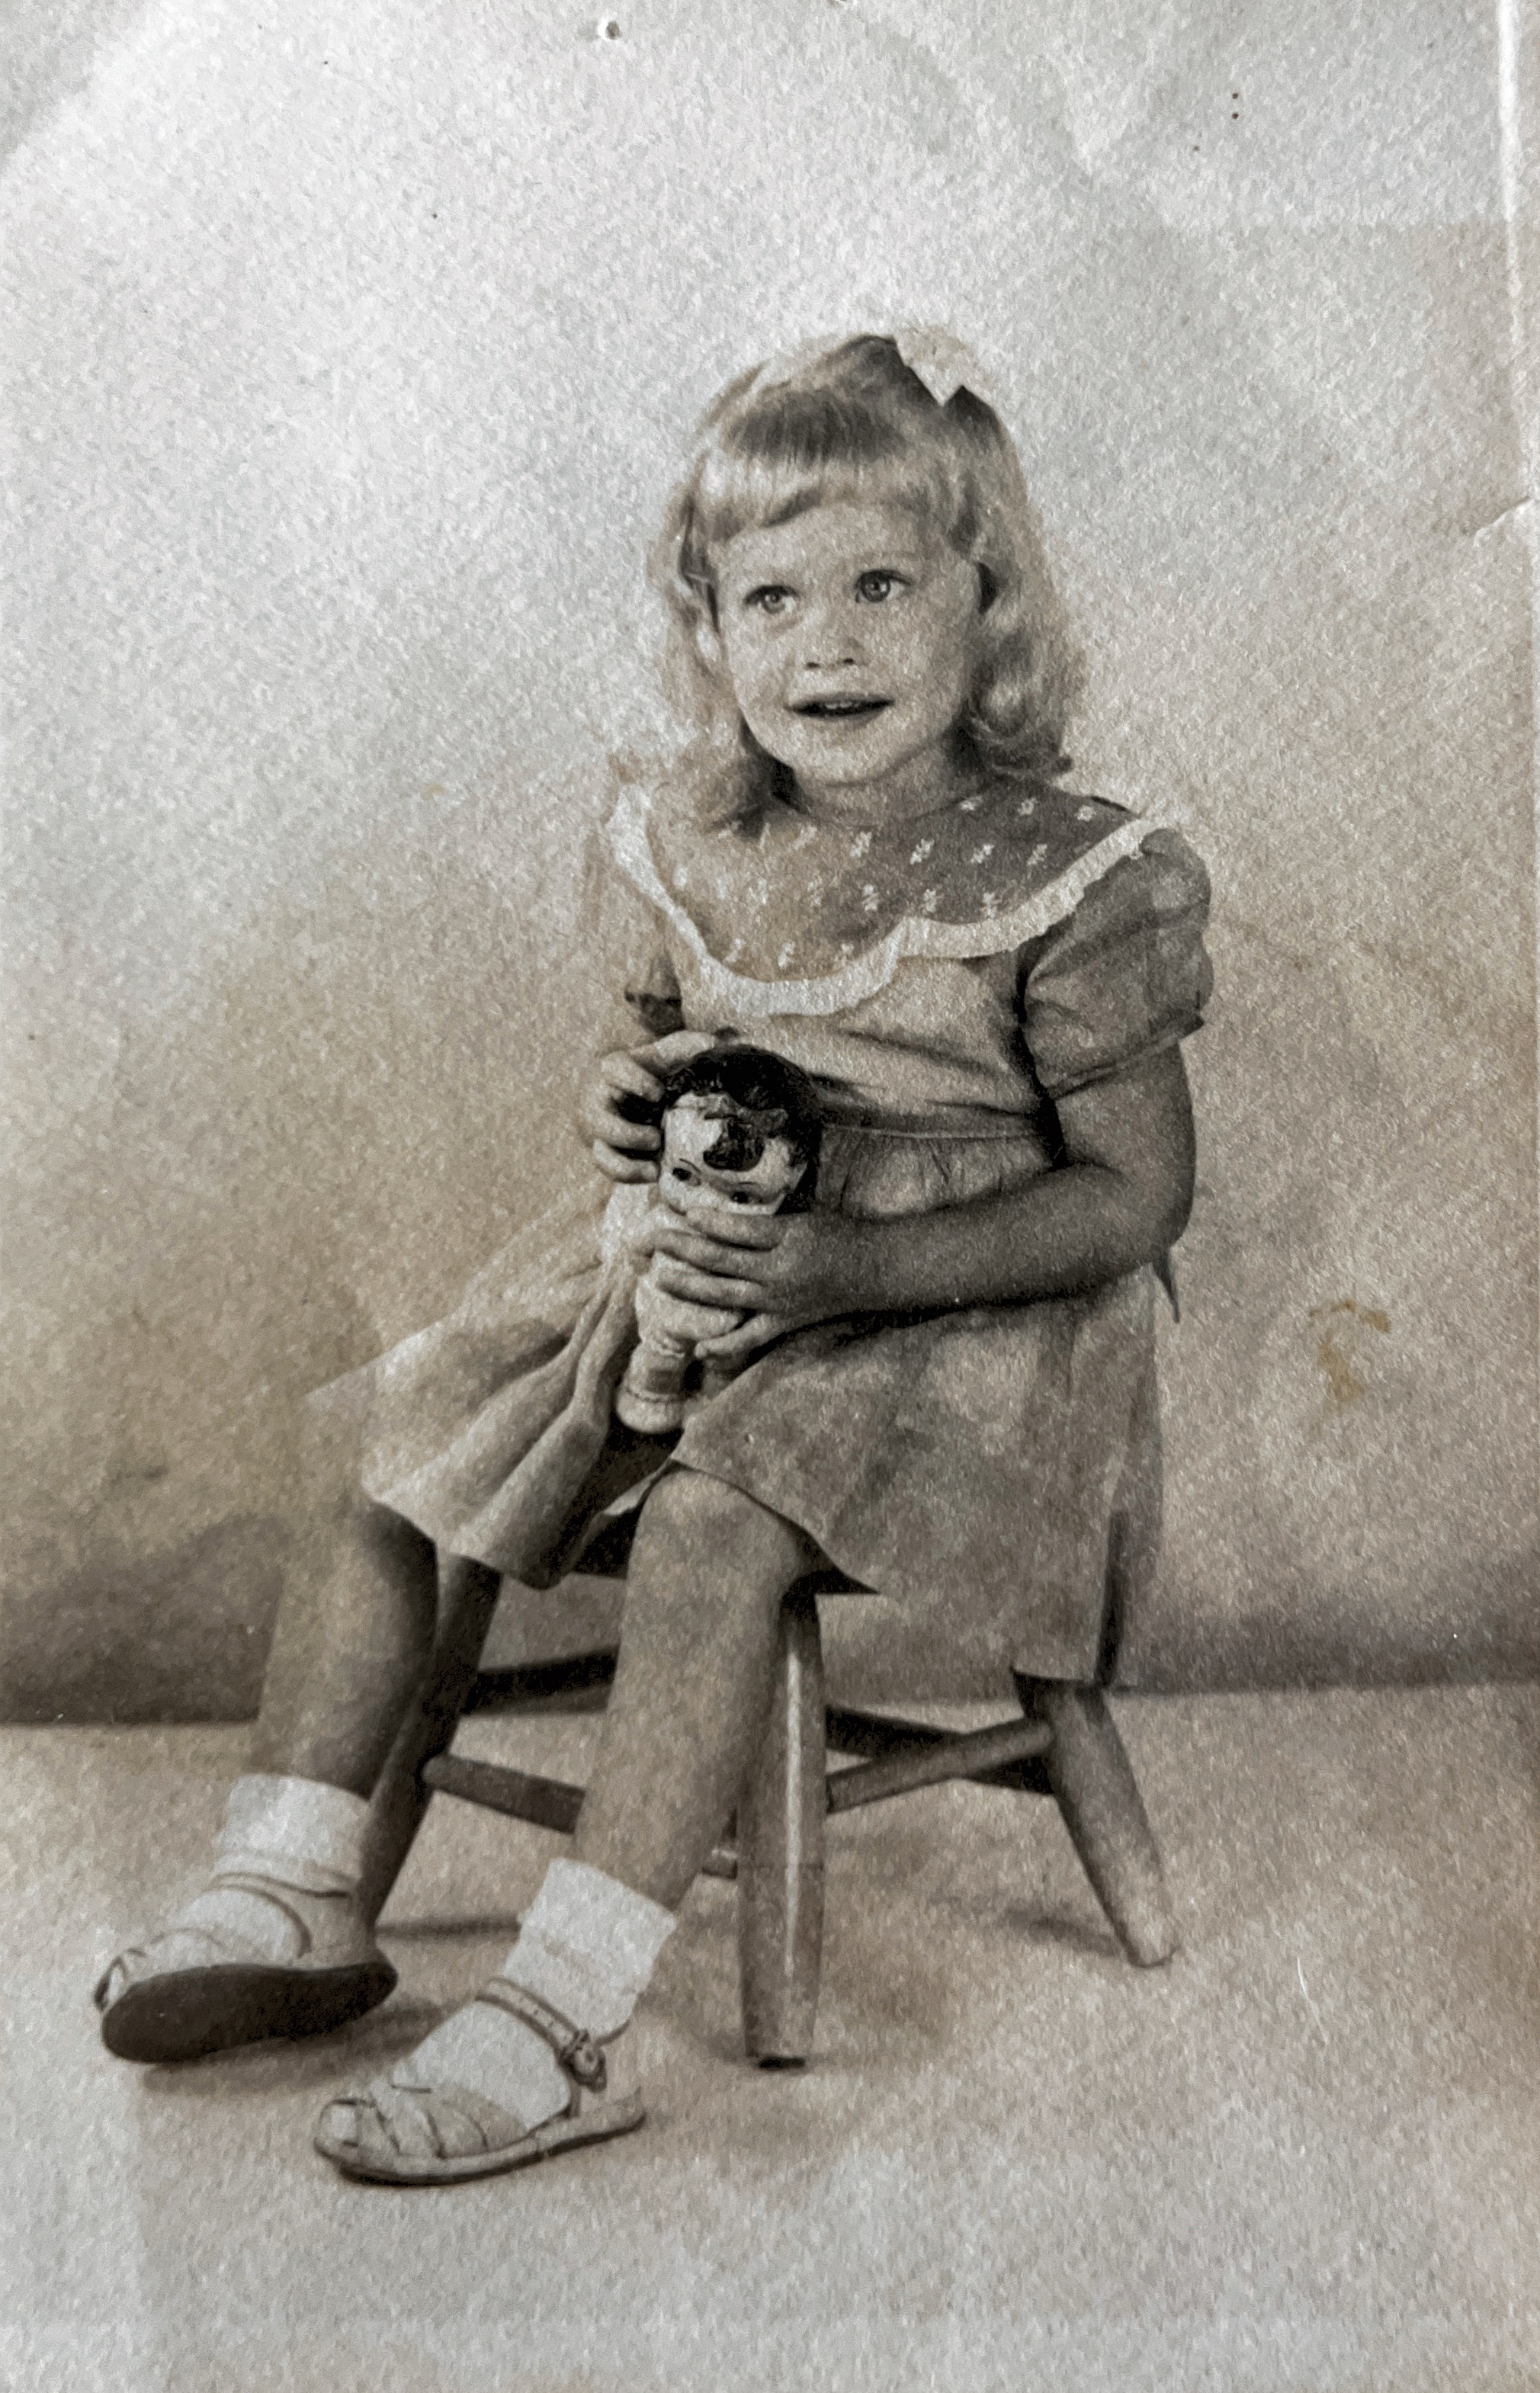 Marcia 1953, 2 years old